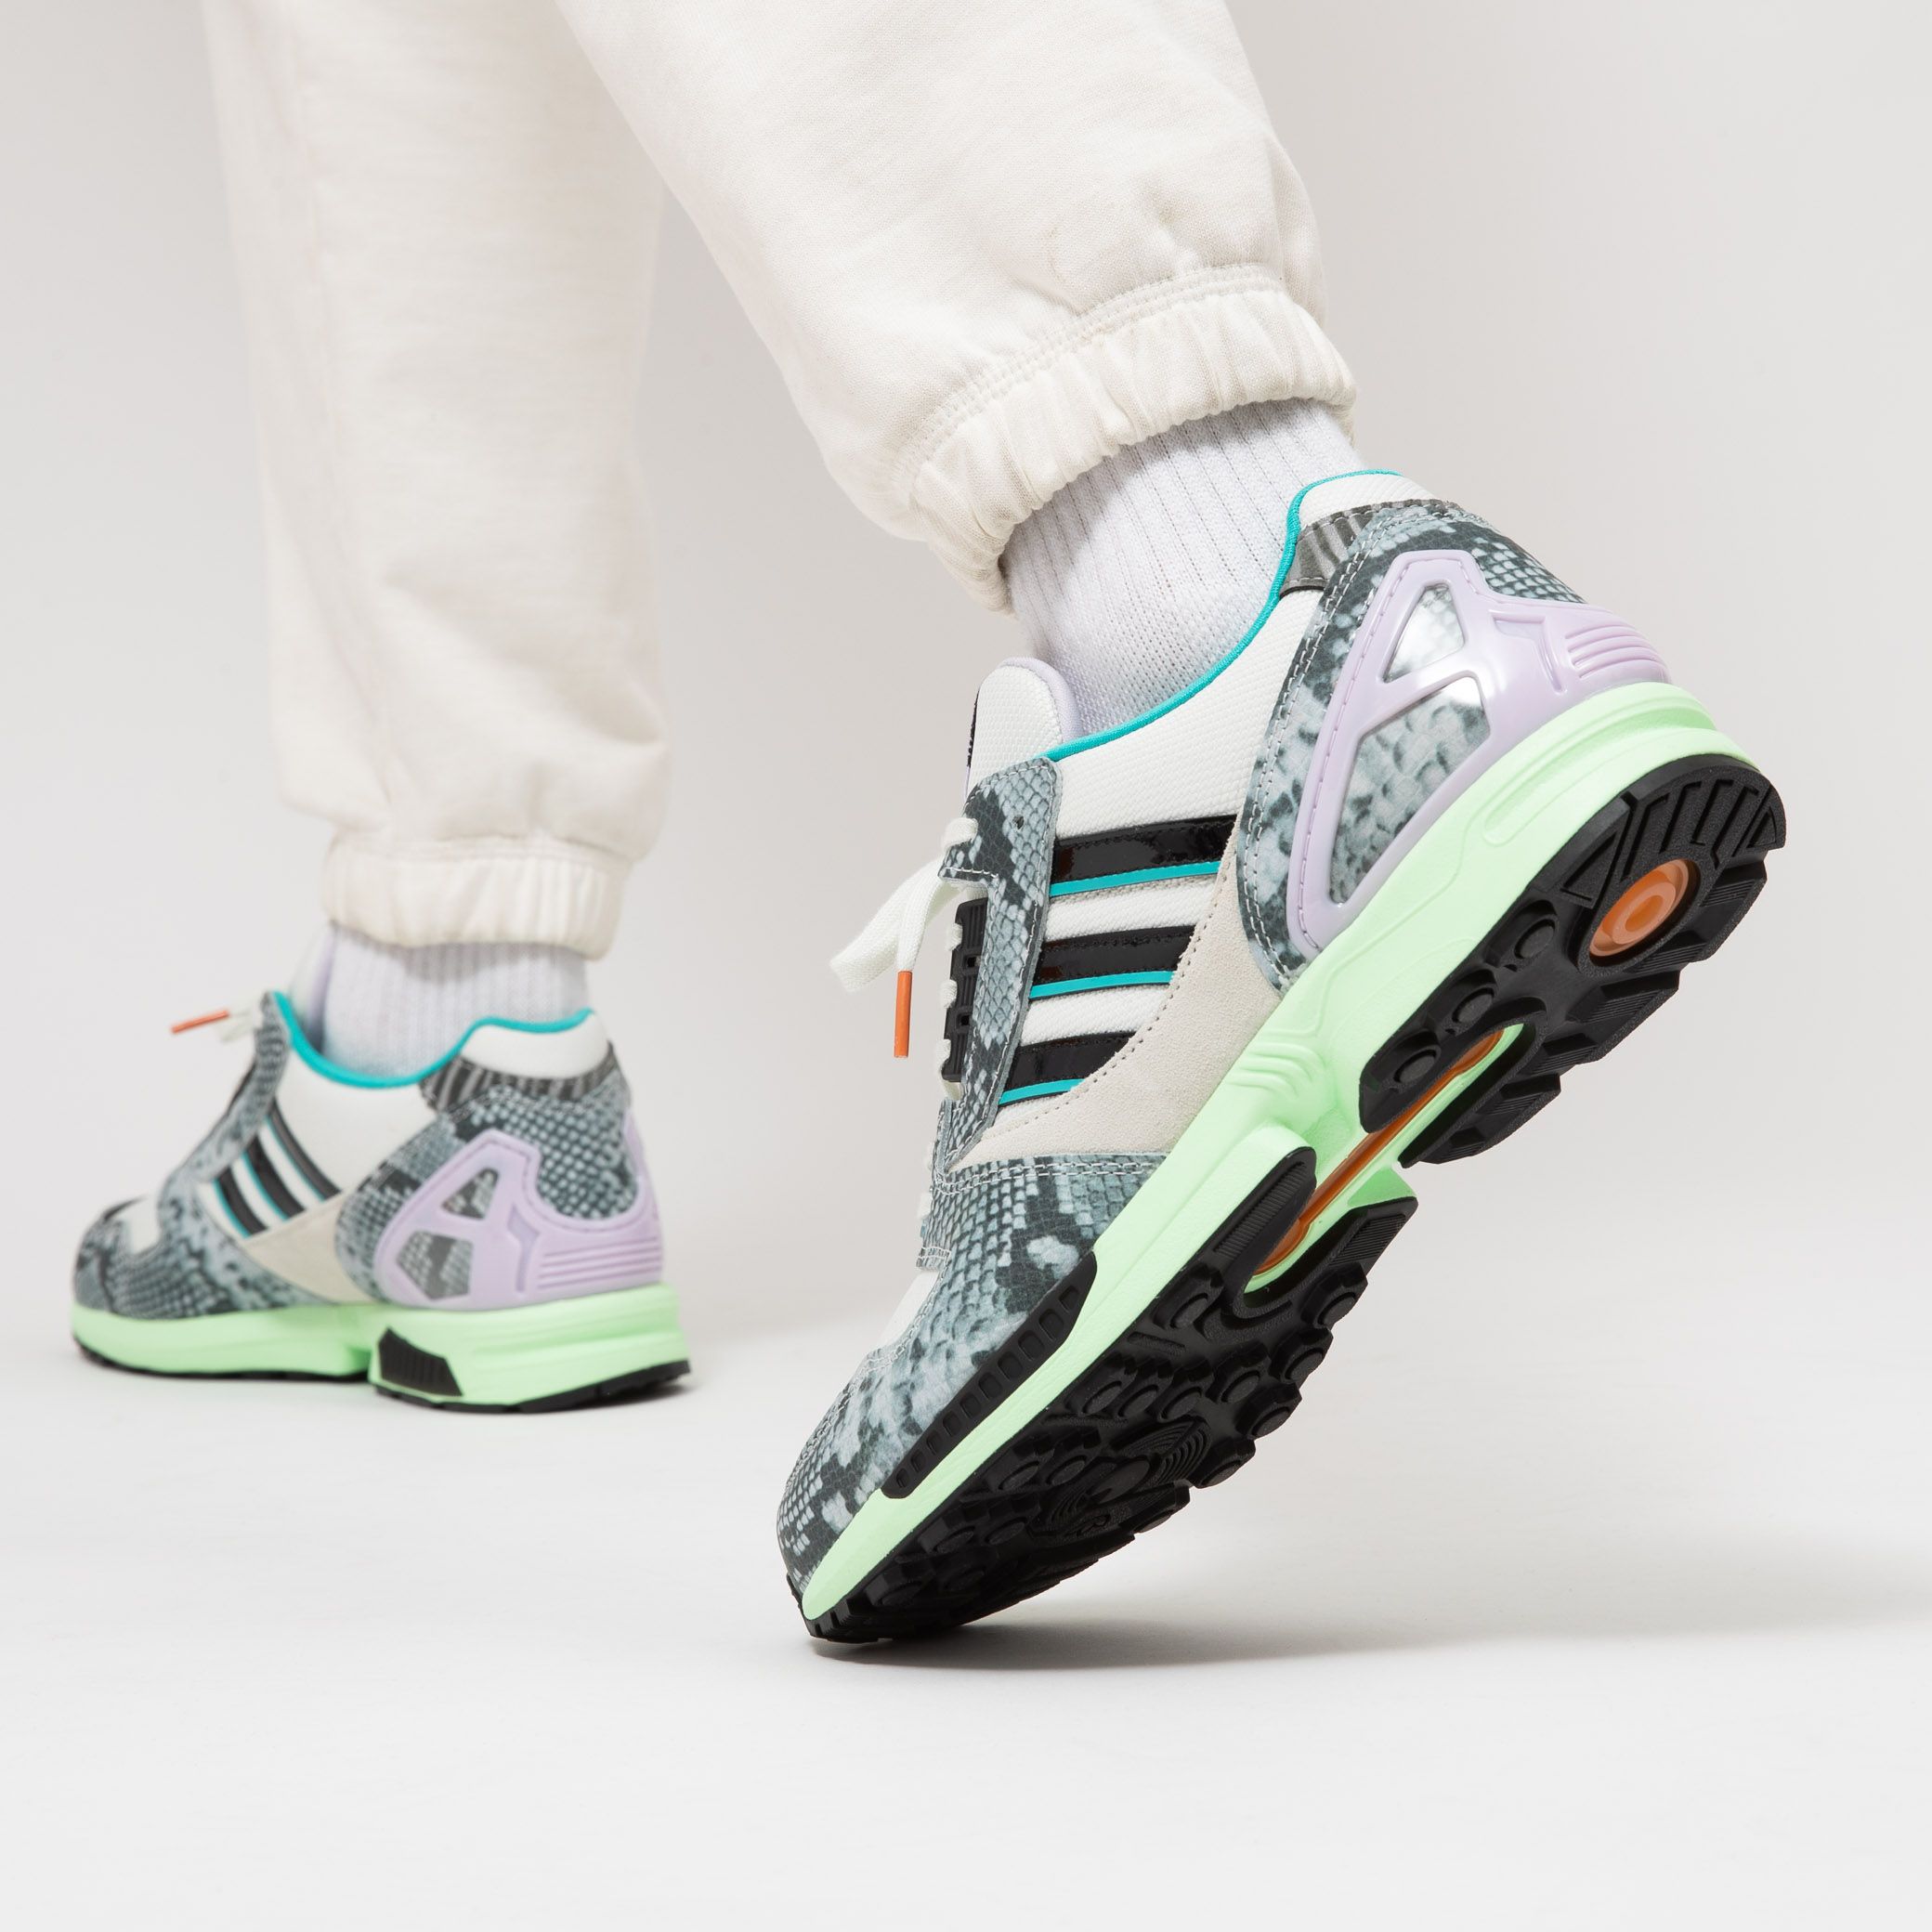 portemonnee kiezen Seraph Titolo on Twitter: "adidas ZX 8000 "Lethal Nights Pack" available for  purchase ➡️ https://t.co/XpTHyCTmBl UK 7.5 (40 2/3) - UK 11 (46) style code  🔎 FW2152 #adidas #adidasoriginals #zx8000 #titolo #titoloshop  https://t.co/VgCYPRuPmN" / Twitter